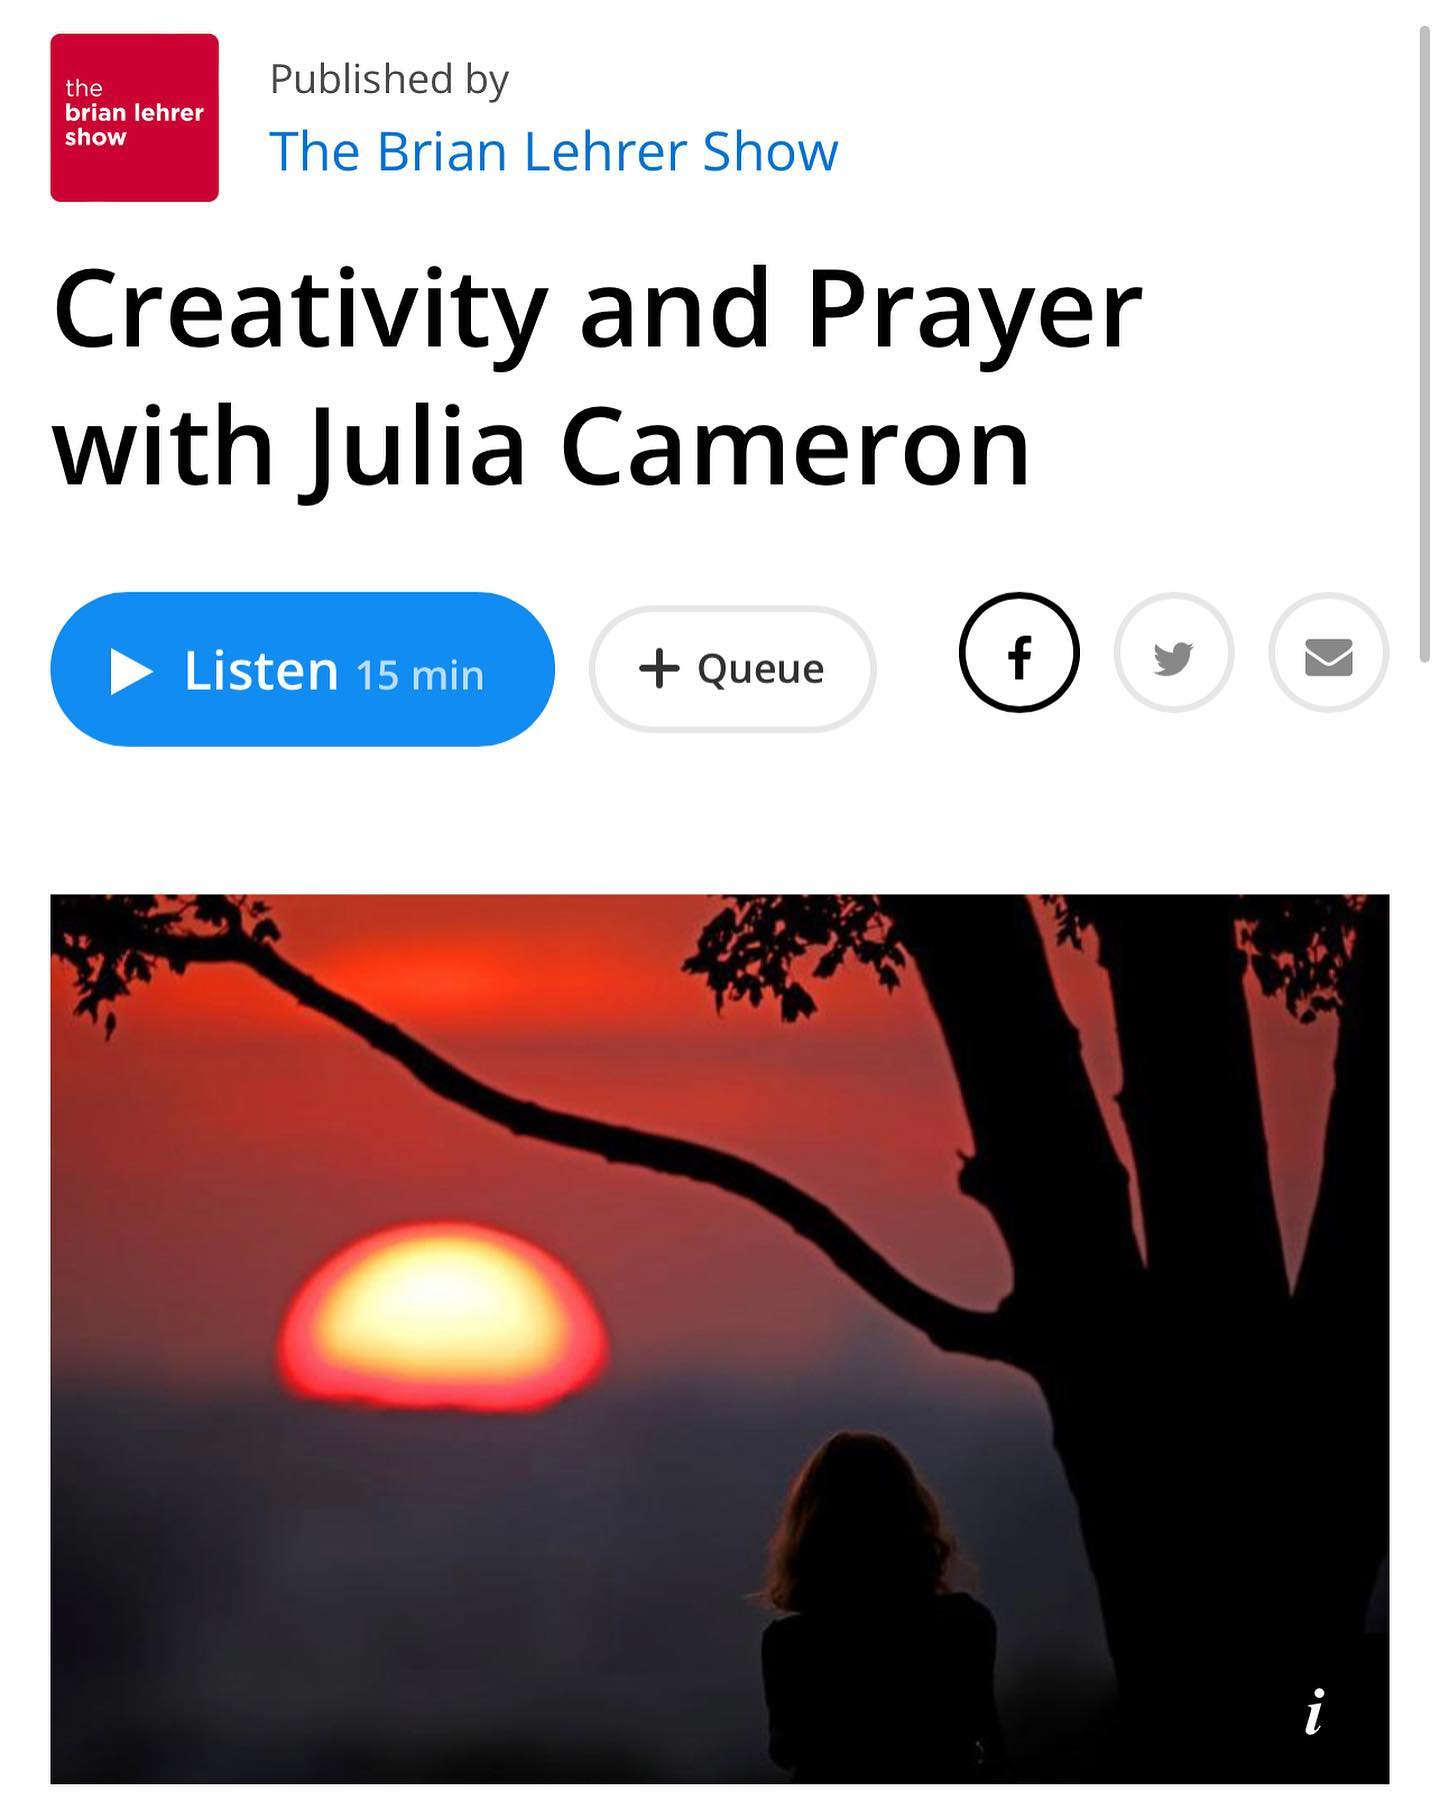 @brianlehrershow - loved our chat, as always! @wnyc https://www.wnyc.org/story/creativity-and-prayer-julia-cameron/